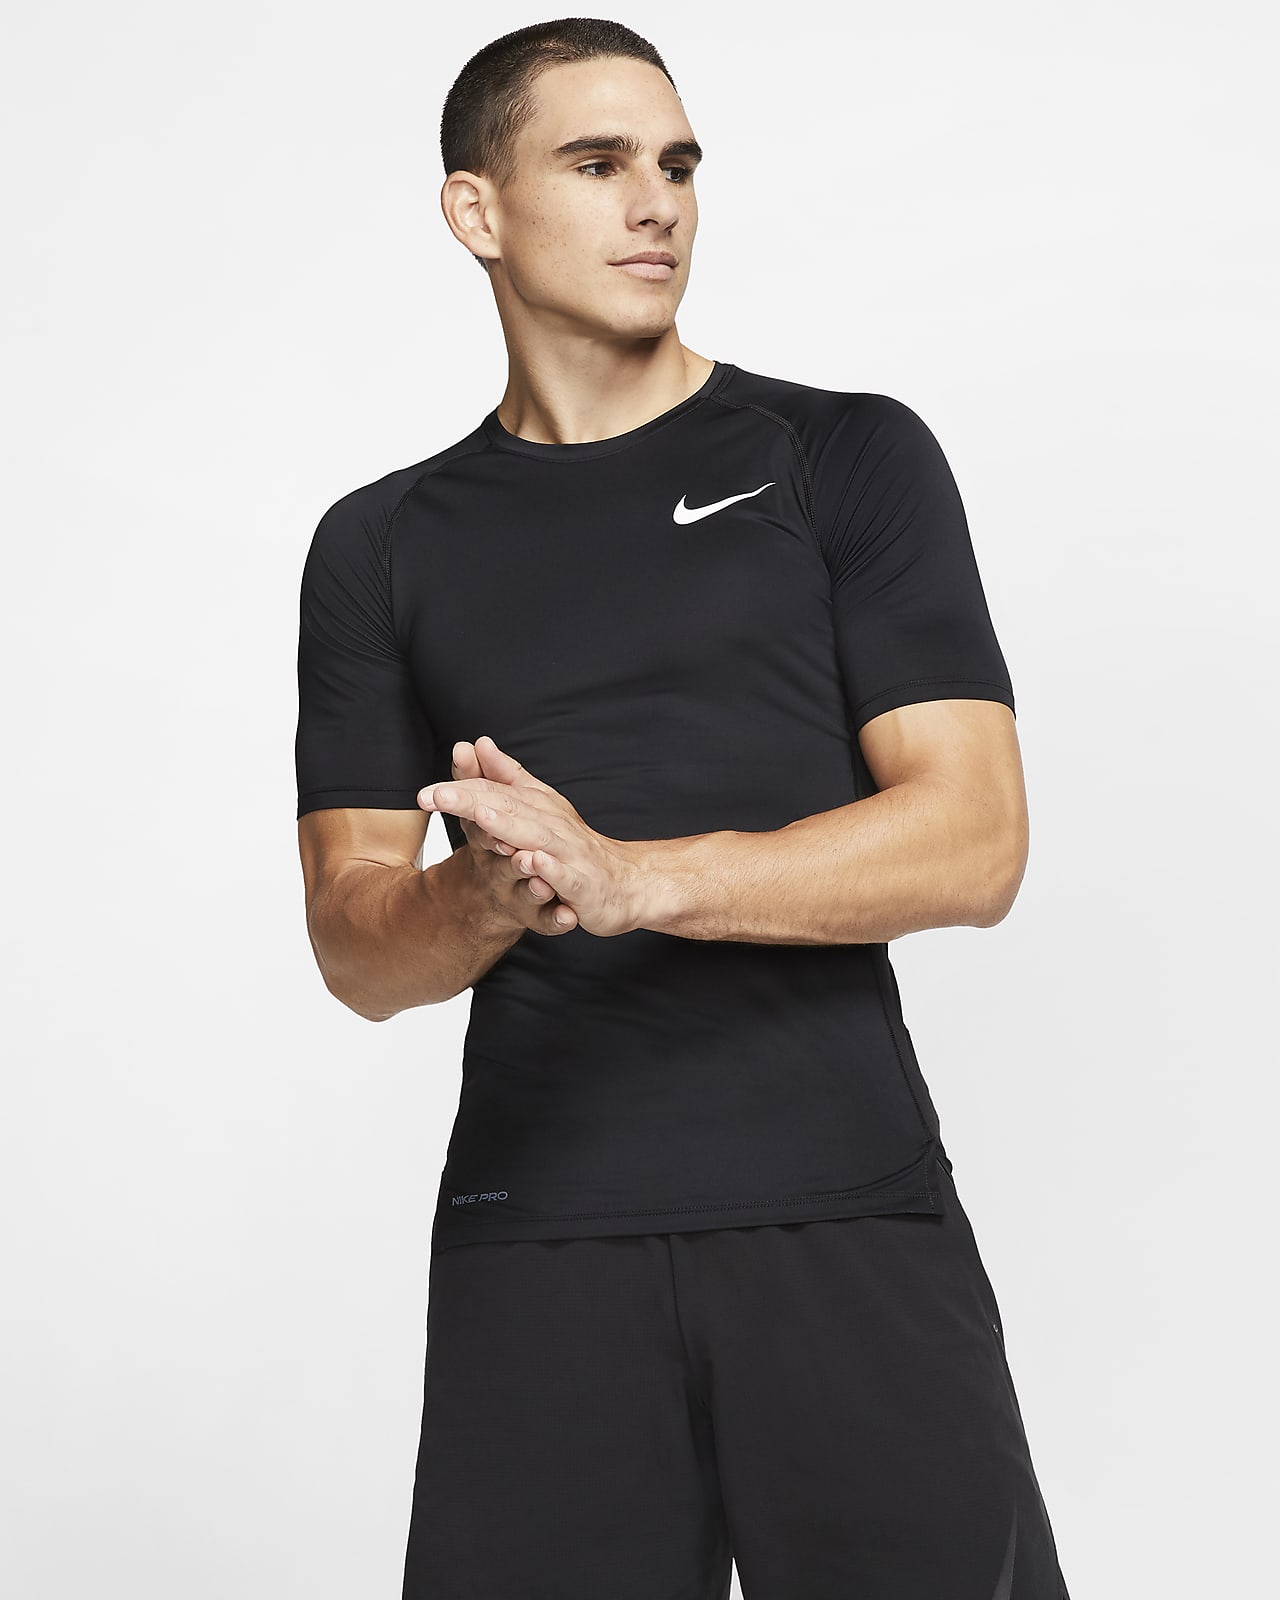 Tight-Fit Short-Sleeve Top. Nike GB